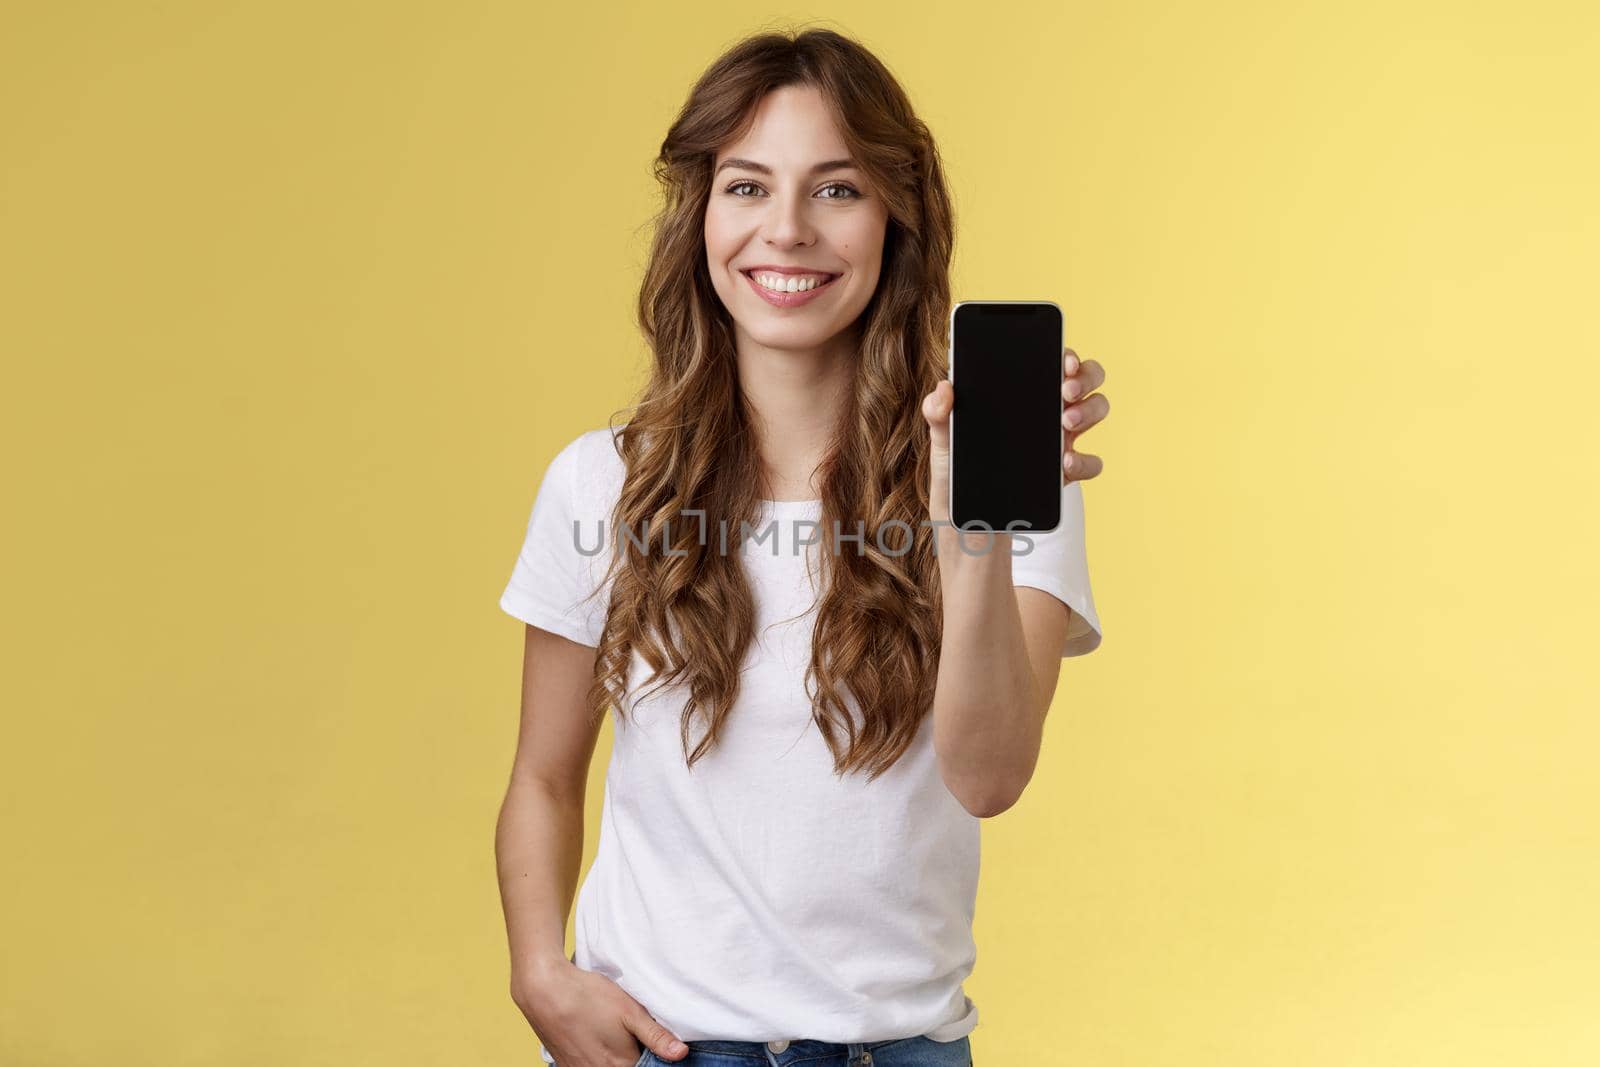 This app all you need. Cheerful friendly outgoing stylish girl showing her smartphone blank mobile phone display camera introduce social media page smiling delighted bragging bank account.